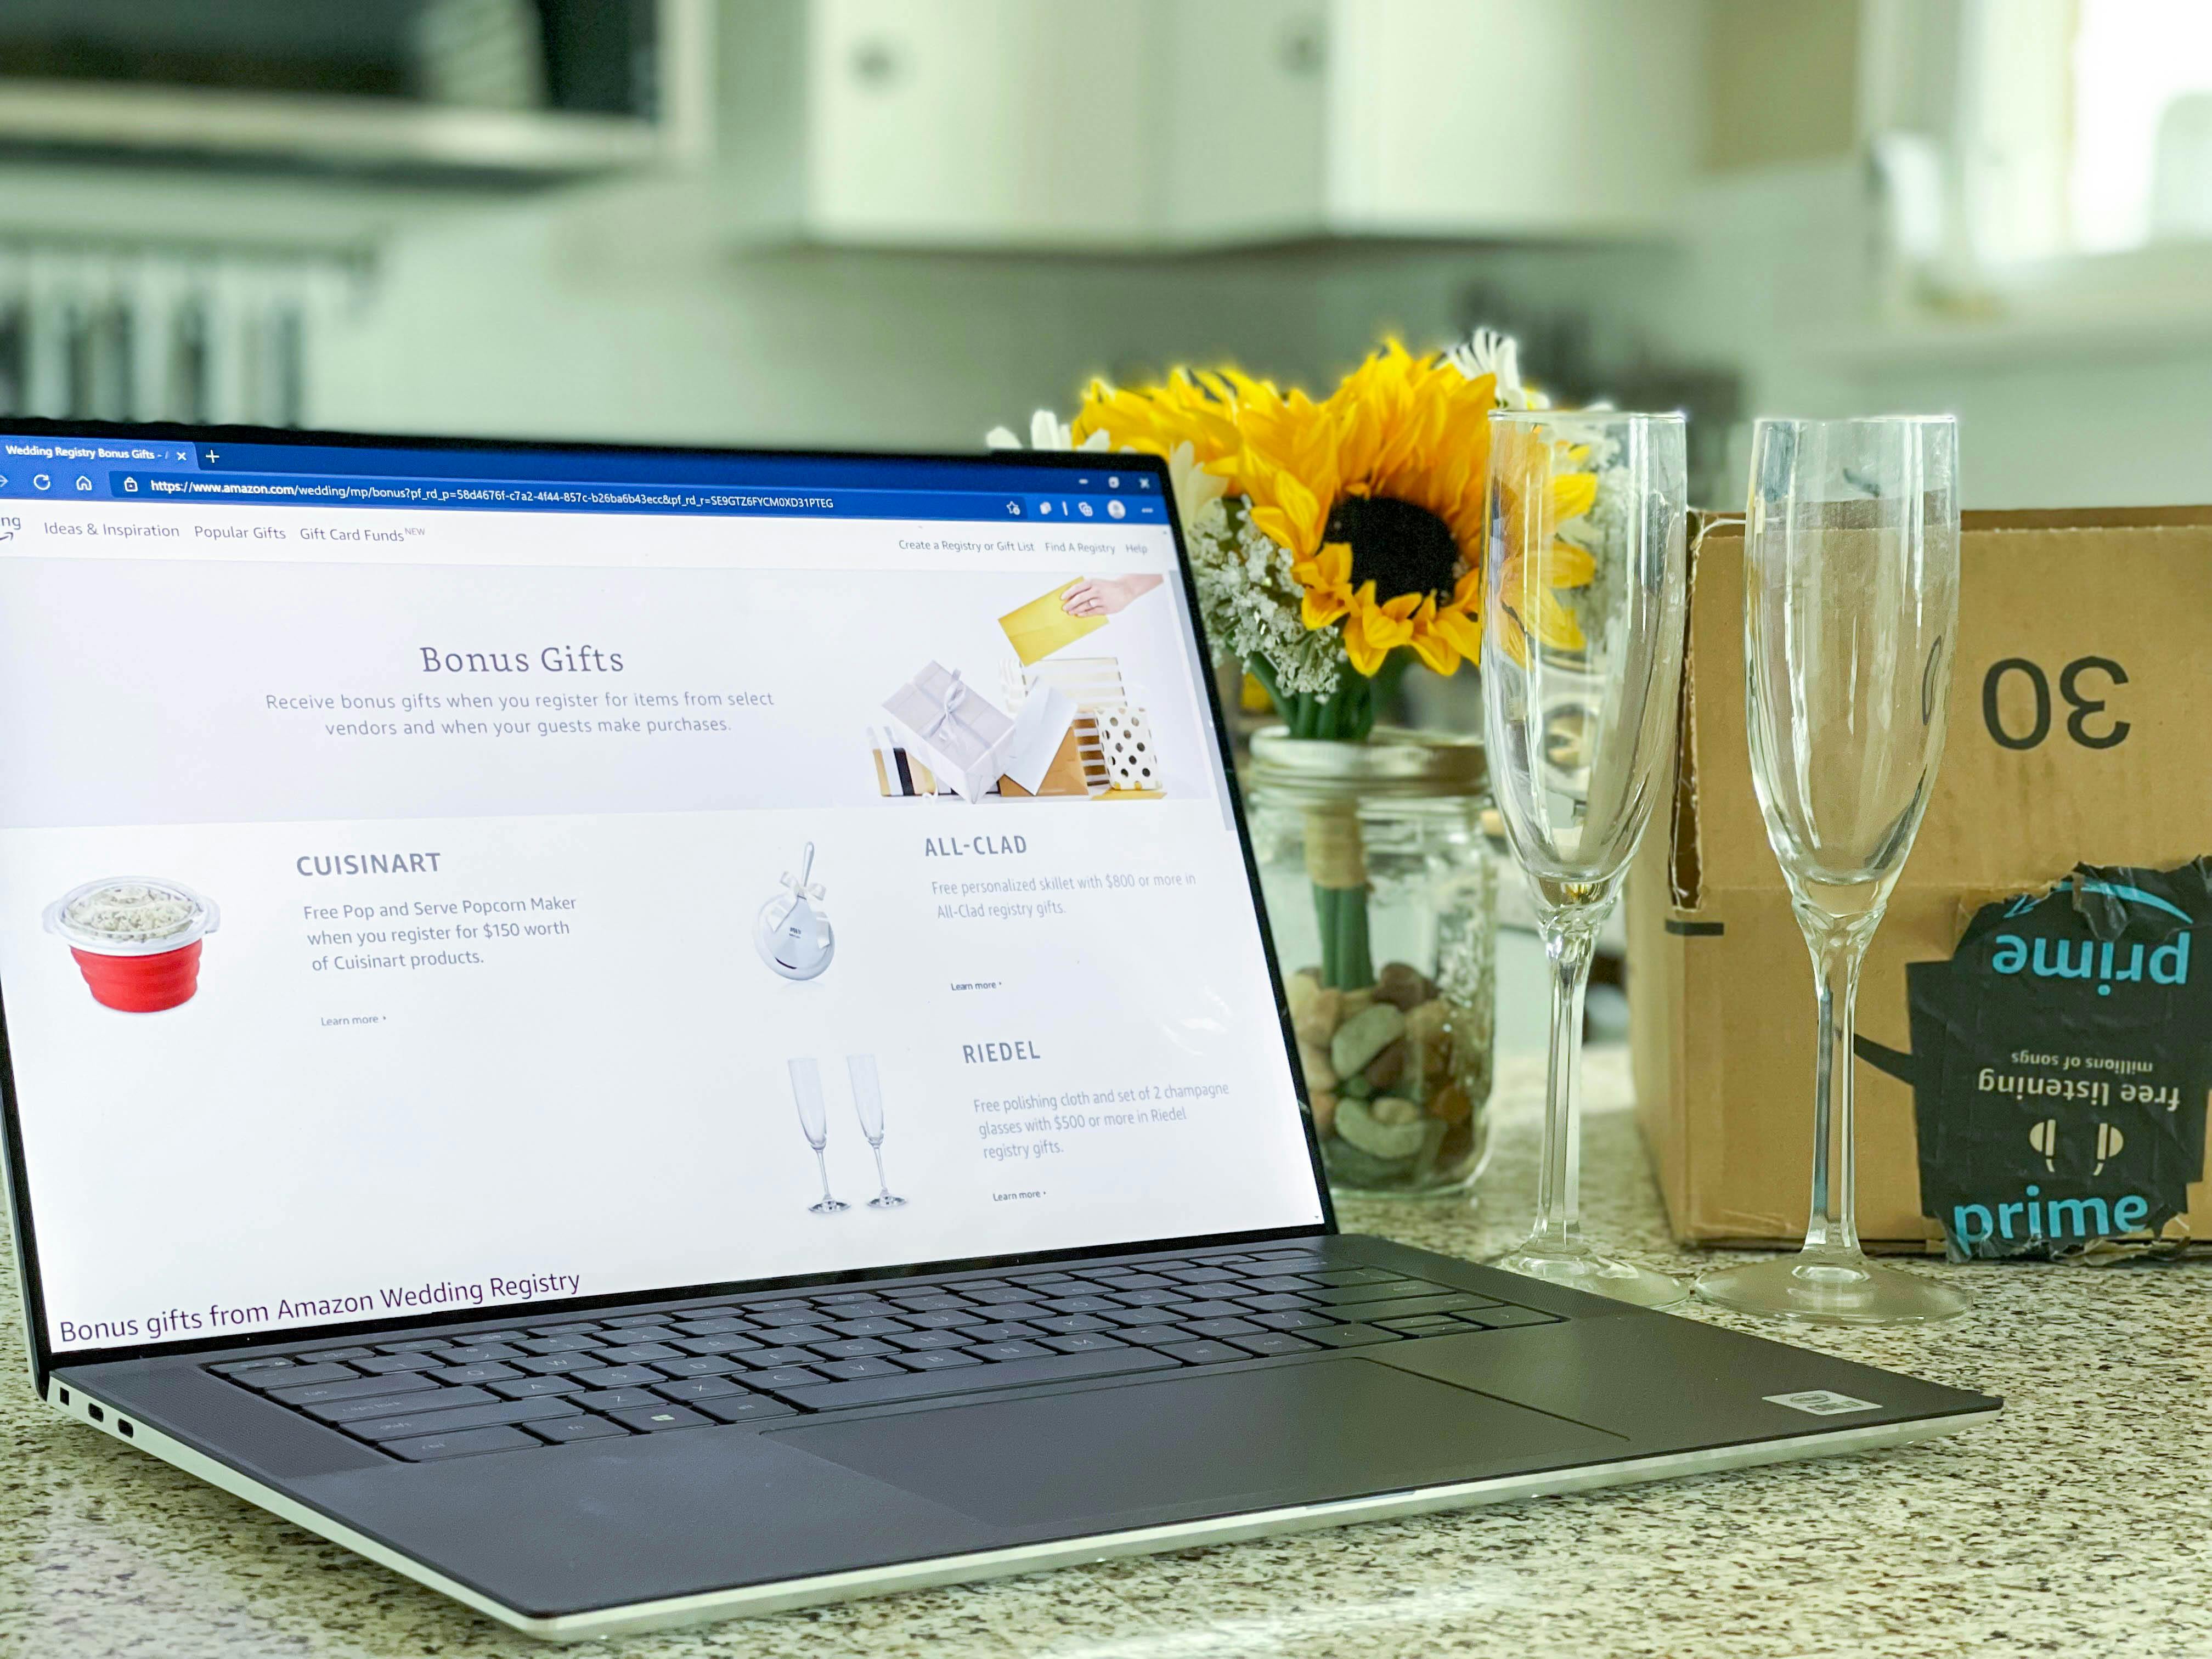 Amazon wedding registry gift page displayed on a laptop next to flowers, an Amazon box, and champagne flutes